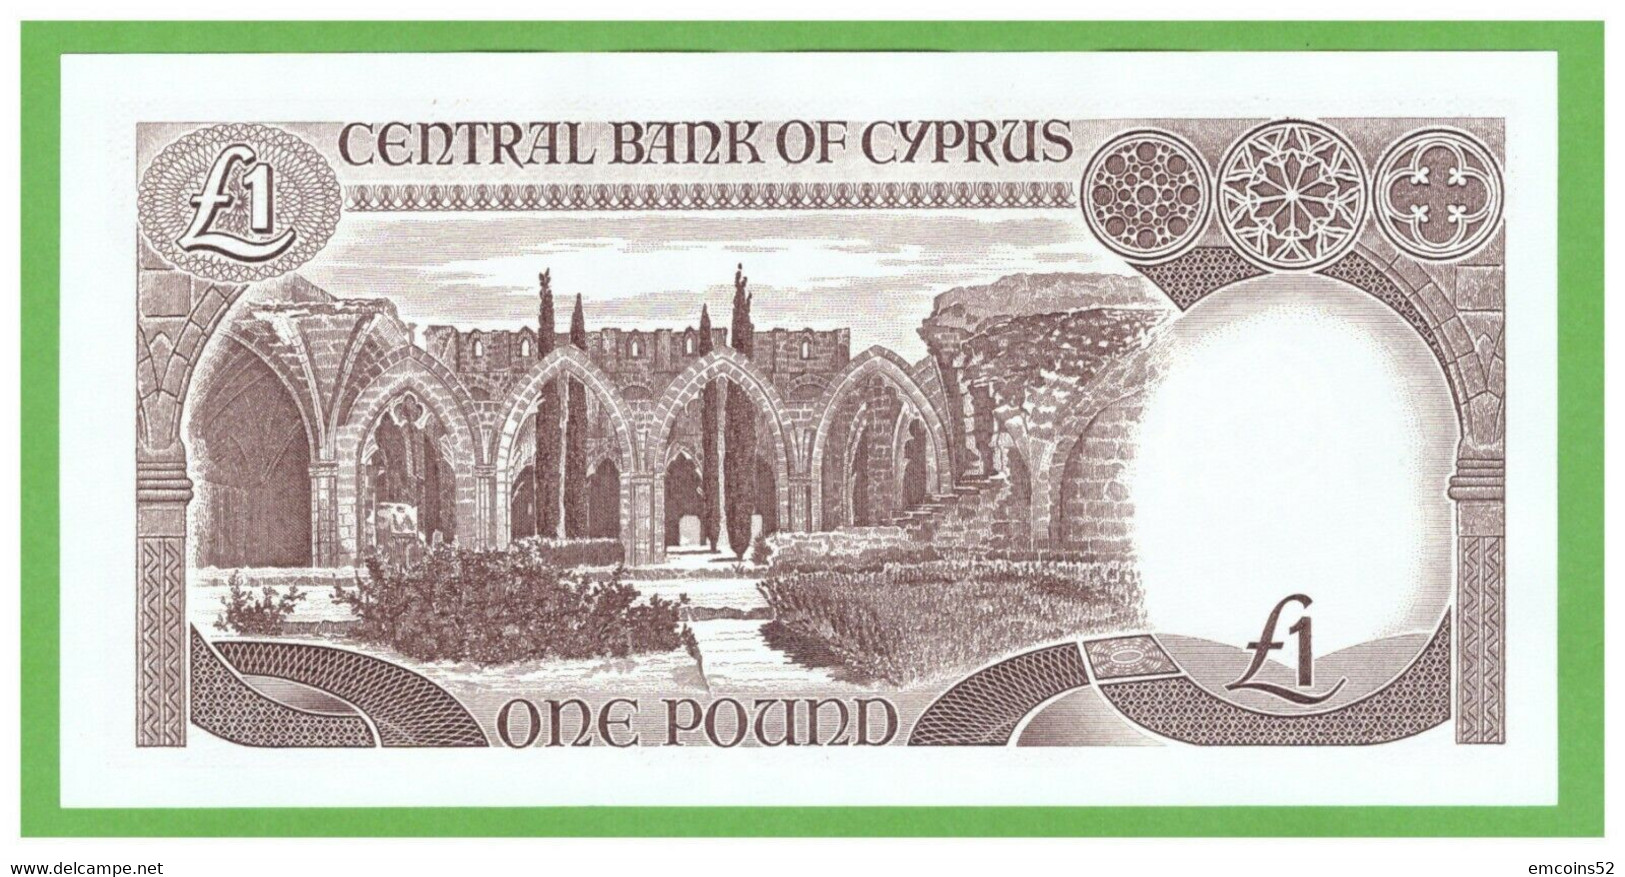 CYPRUS 1 POUND 1988  P-53a UNC  REPLACEMENT Z - Chipre